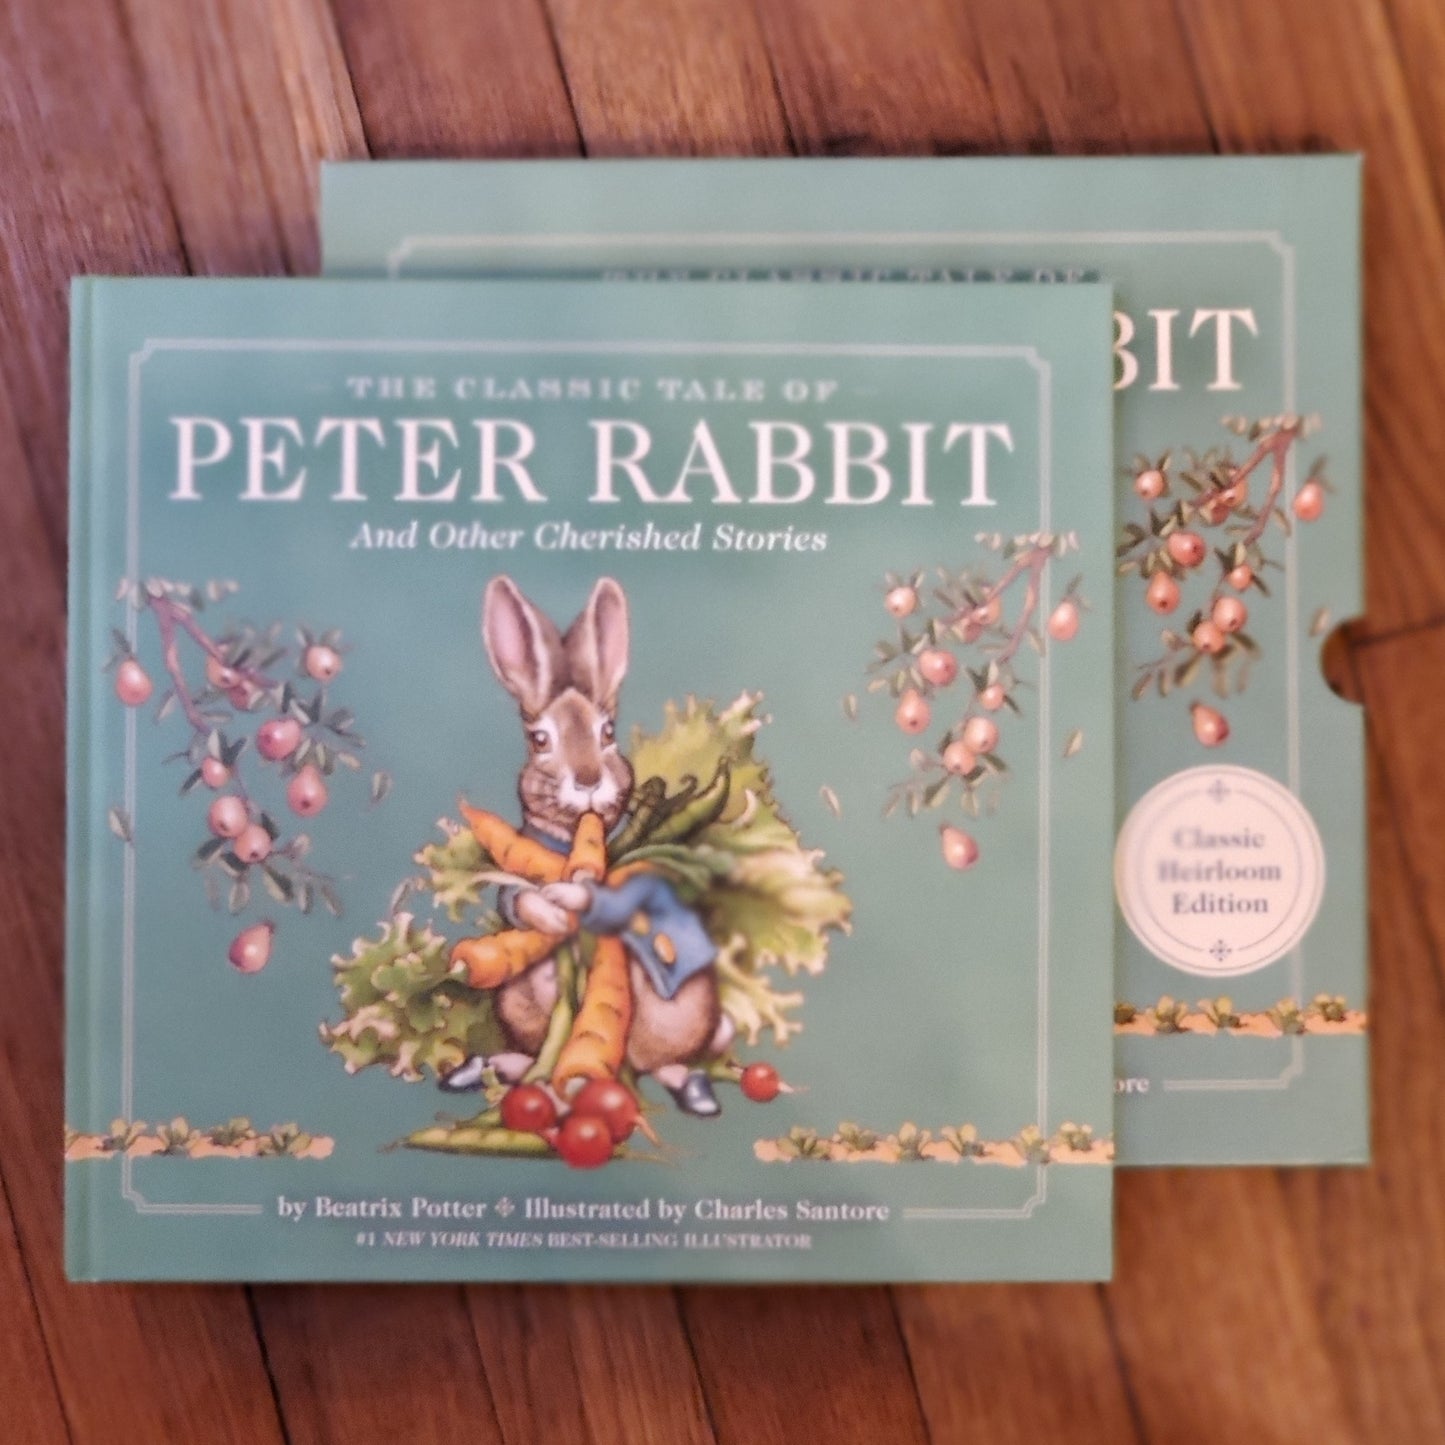 GB The Classic Tale of Peter Rabbit and Other Cherished Stories